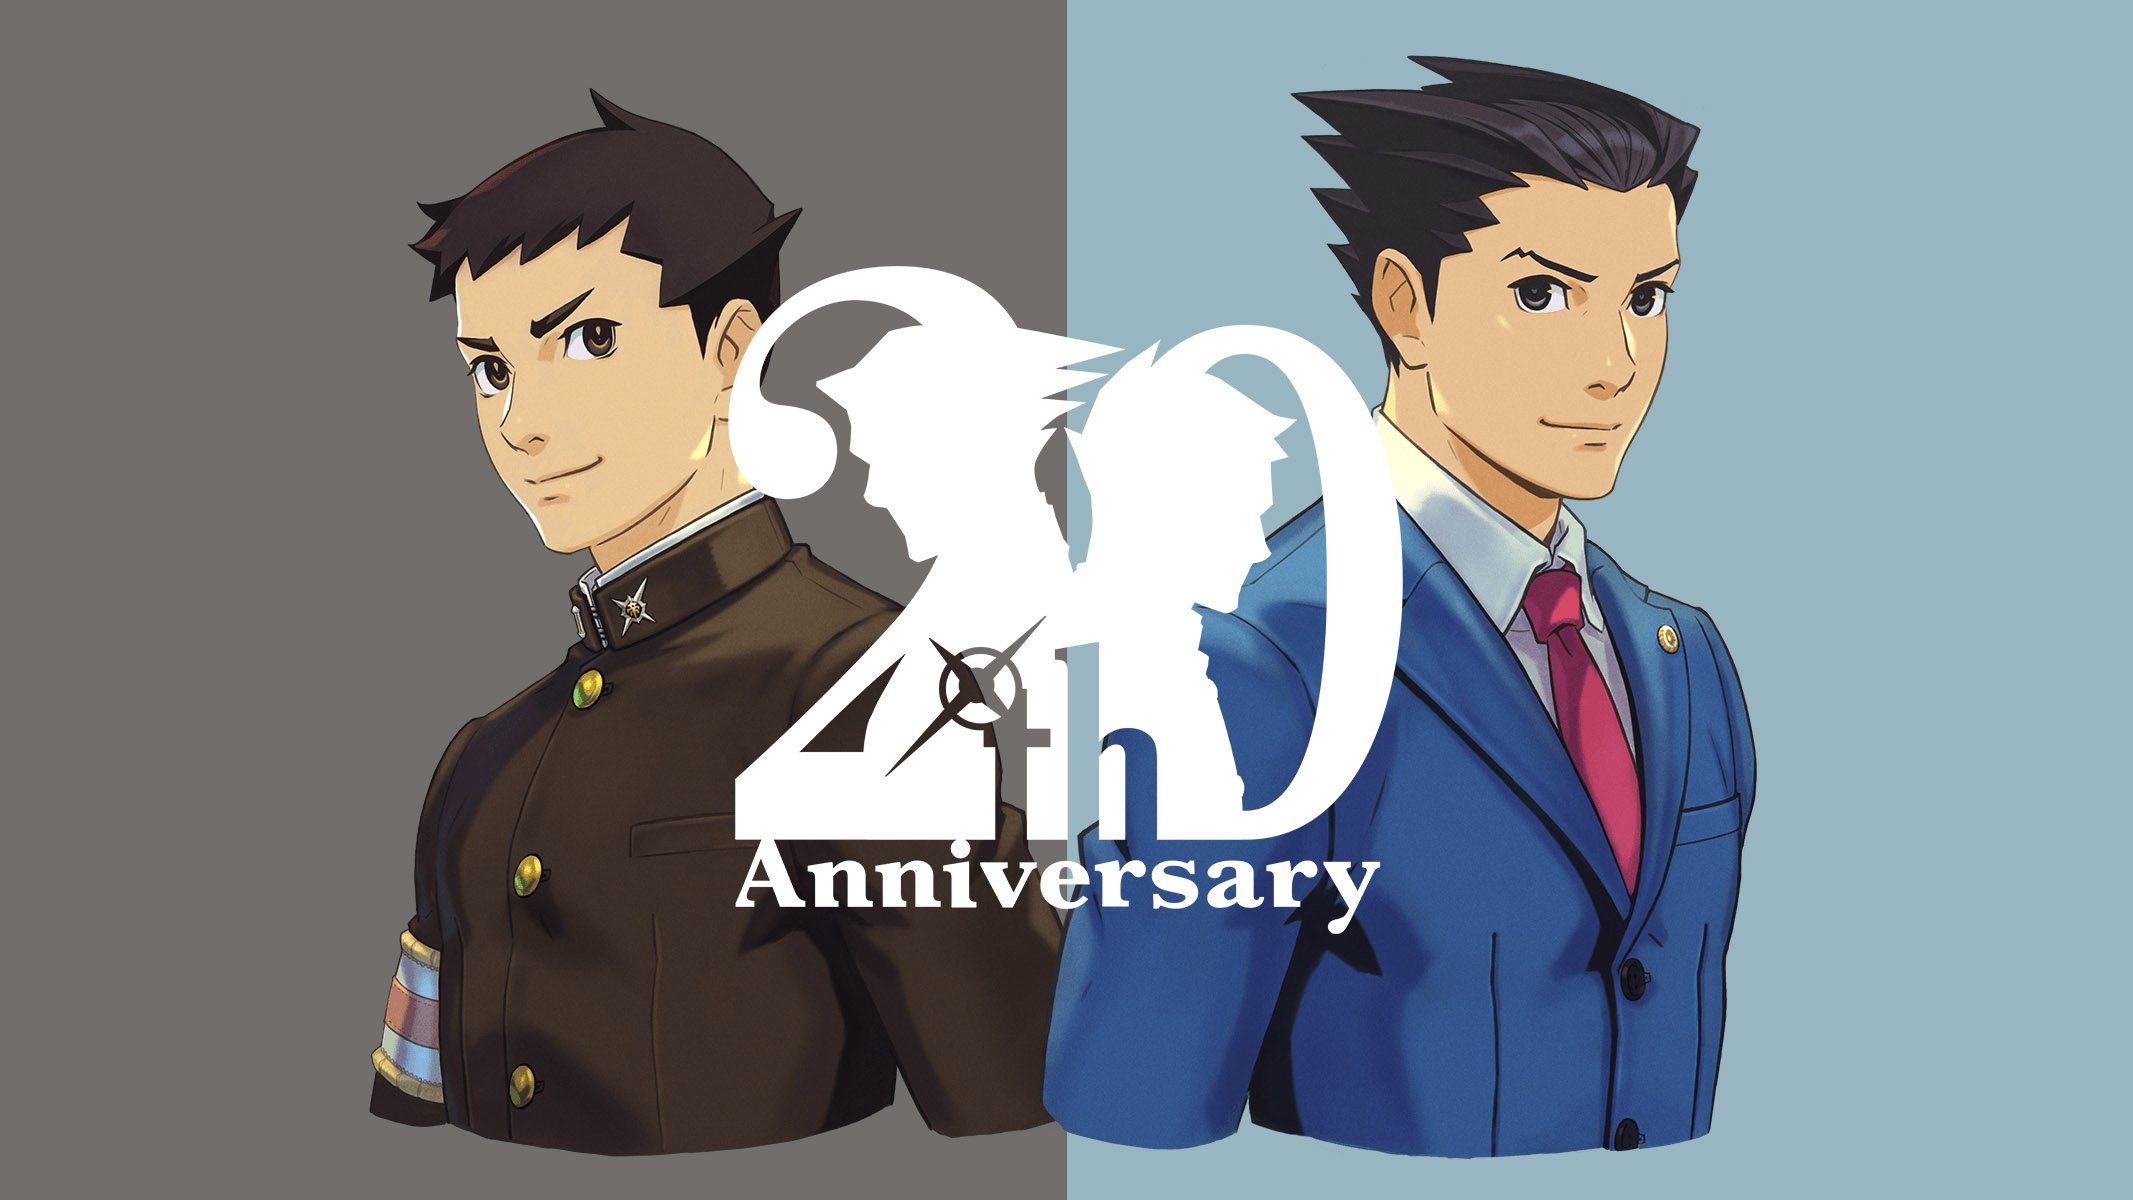 Phoenix Wright: Ace Attorney series 20th anniversary website launched – Gematsu